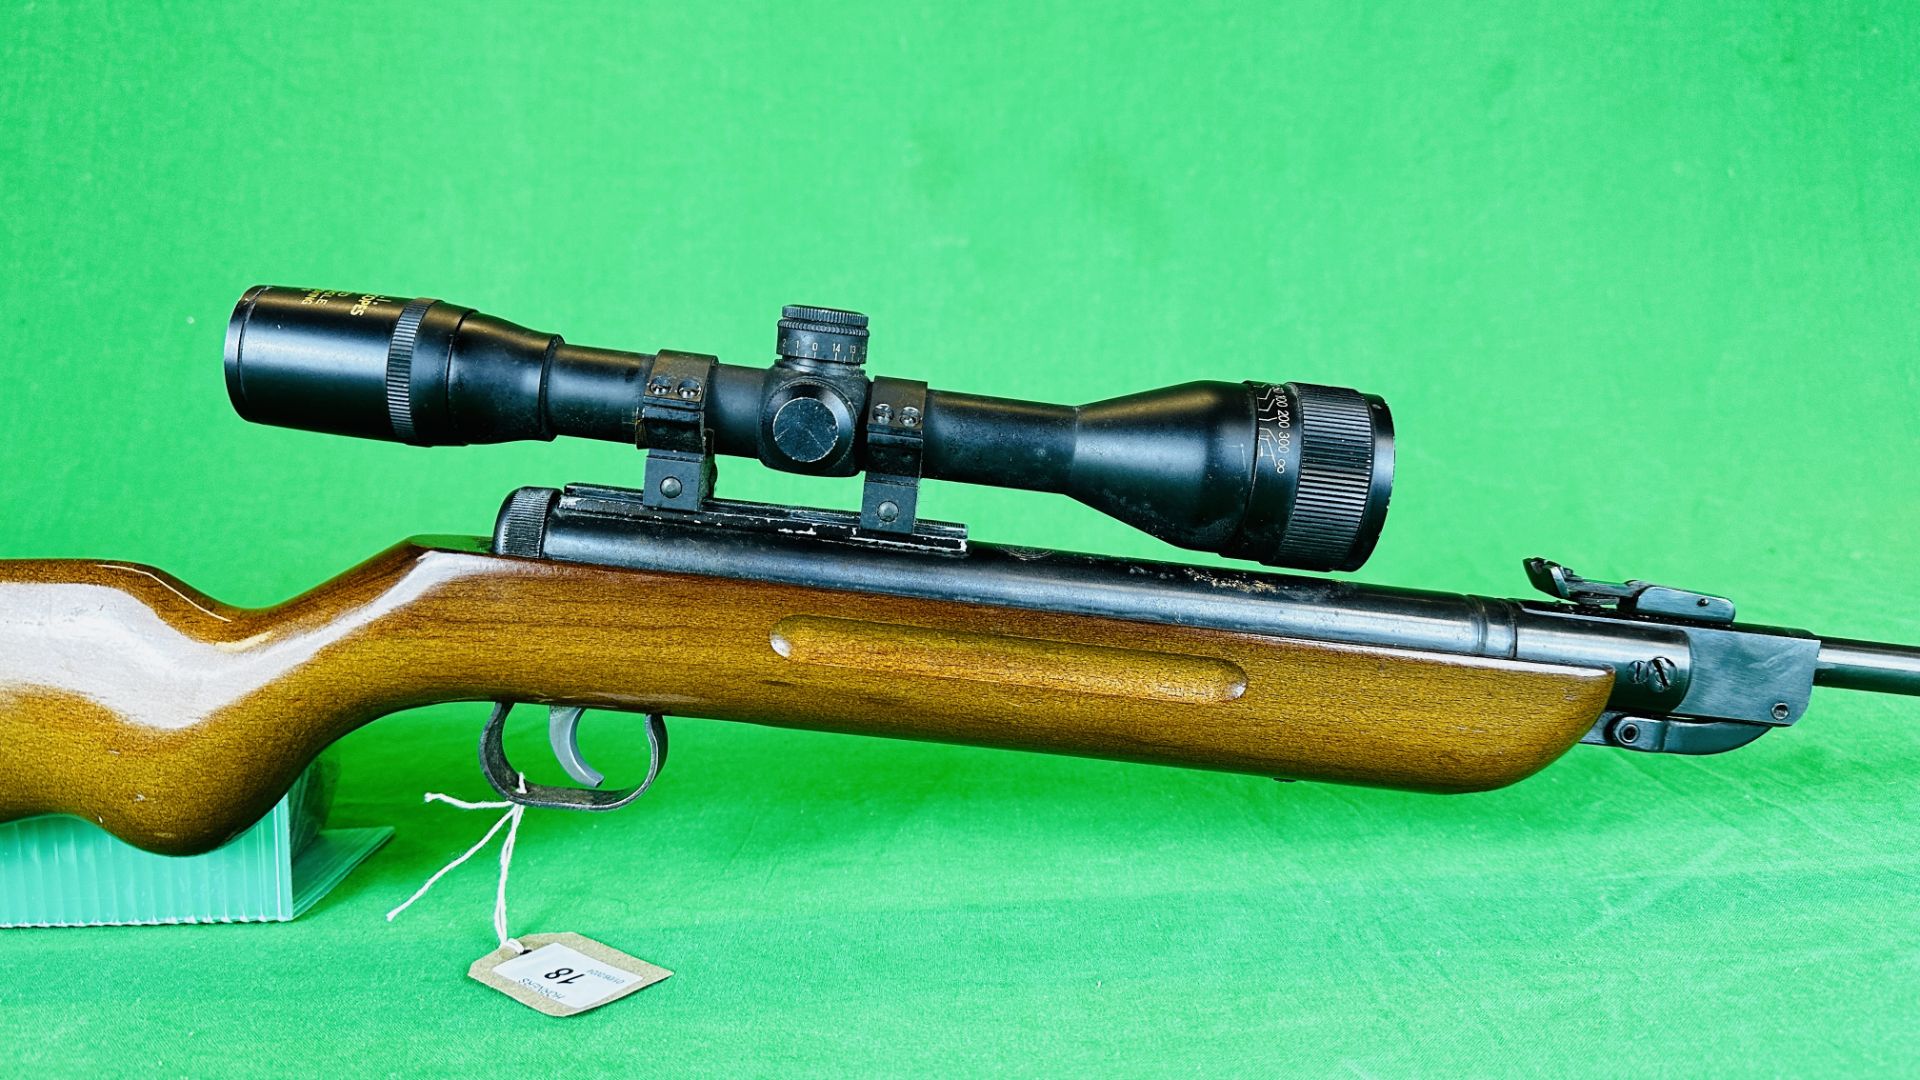 BSF MODEL S60 .22 CALIBRE BREAK BARREL AIR RIFLE FITTED WITH A.S.I. - Image 2 of 12